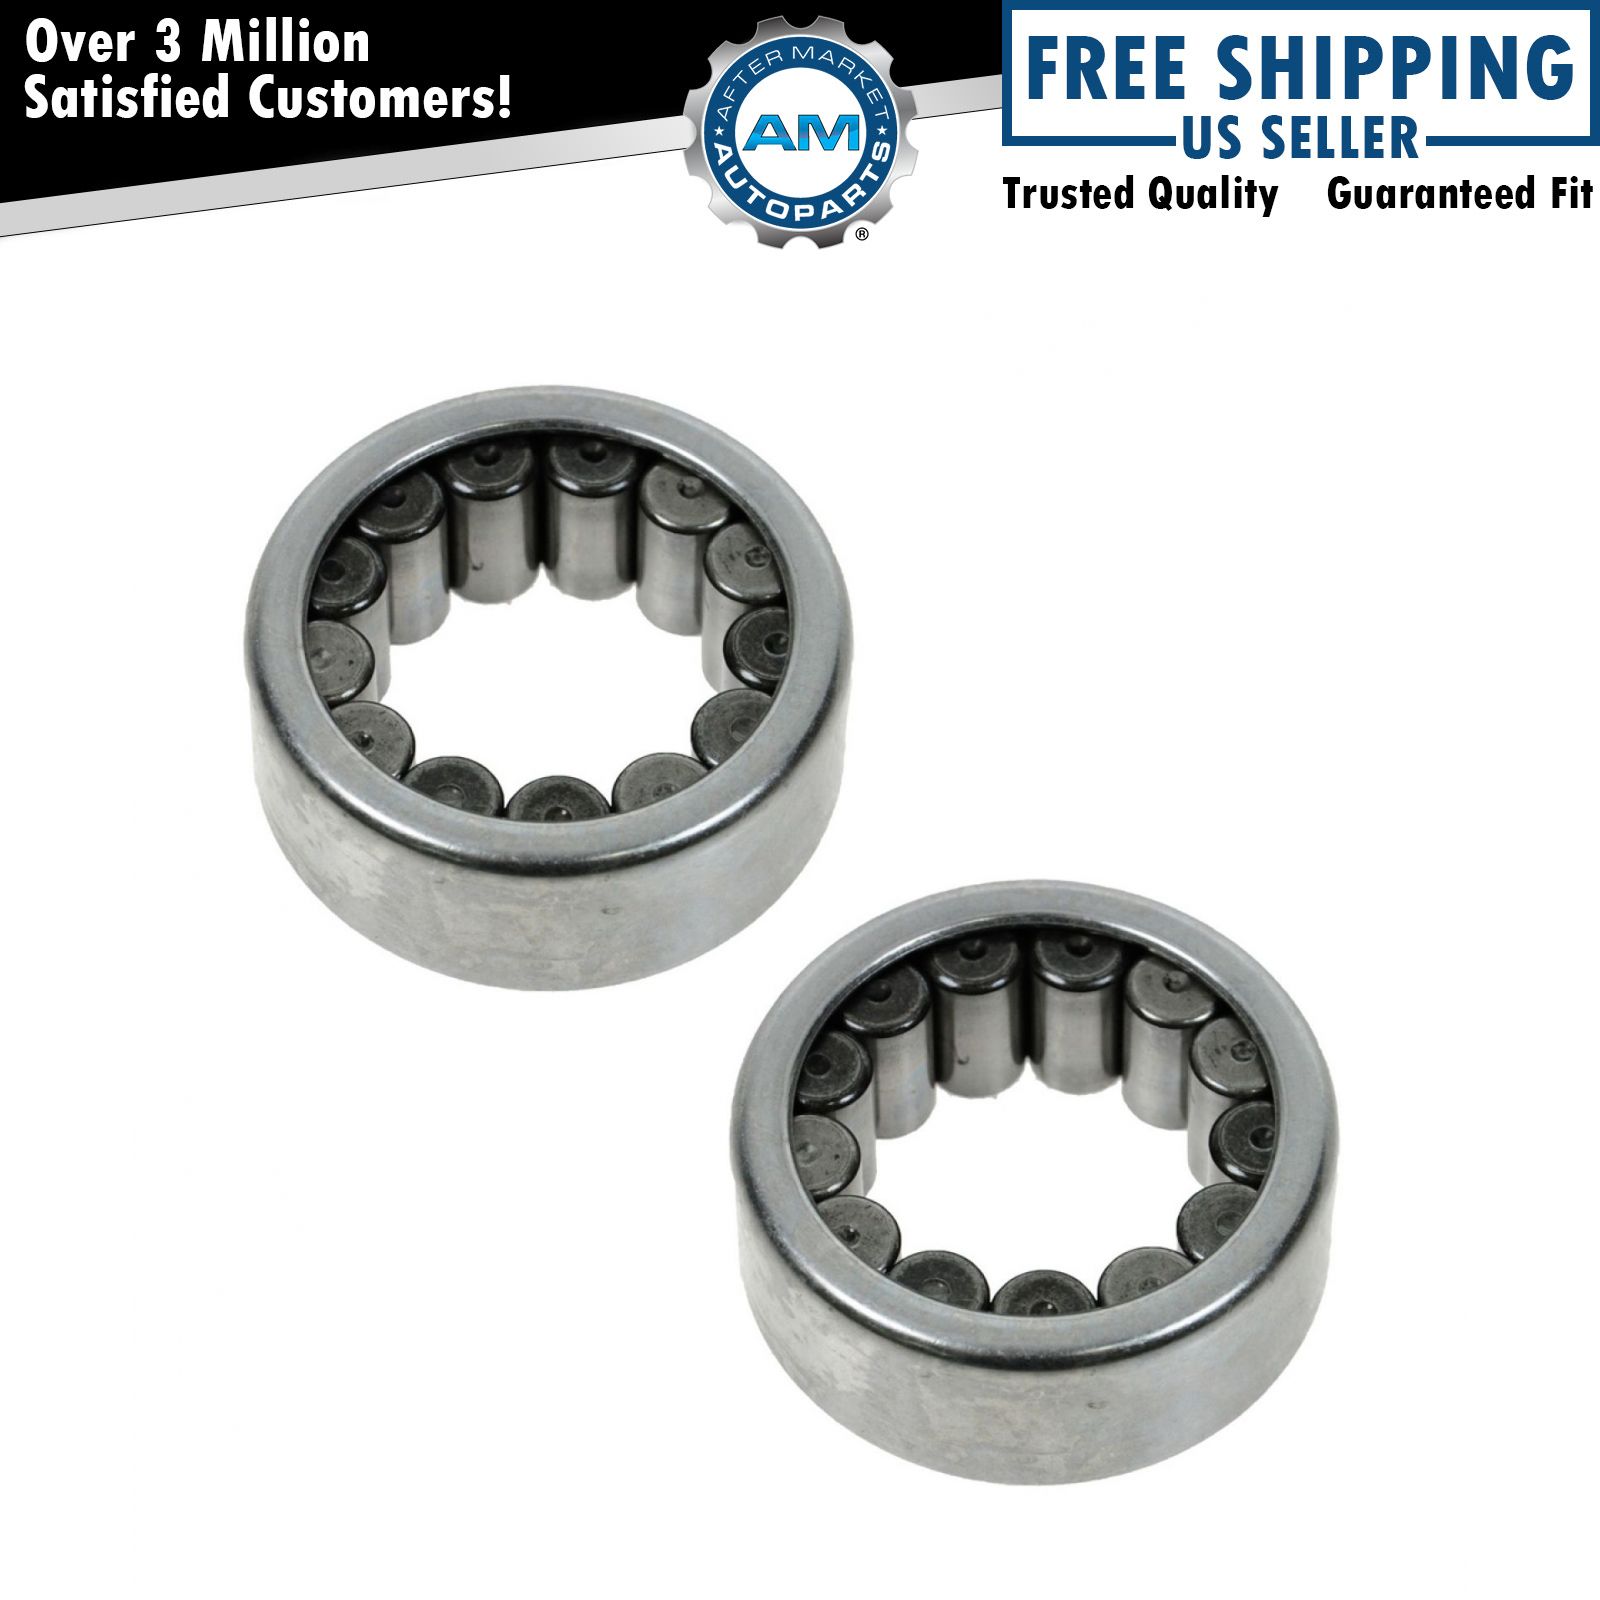 TIMKEN Axle Shaft Wheel Bearing Rear Pair for GM Dodge Ford with 9.5 Ring Gear